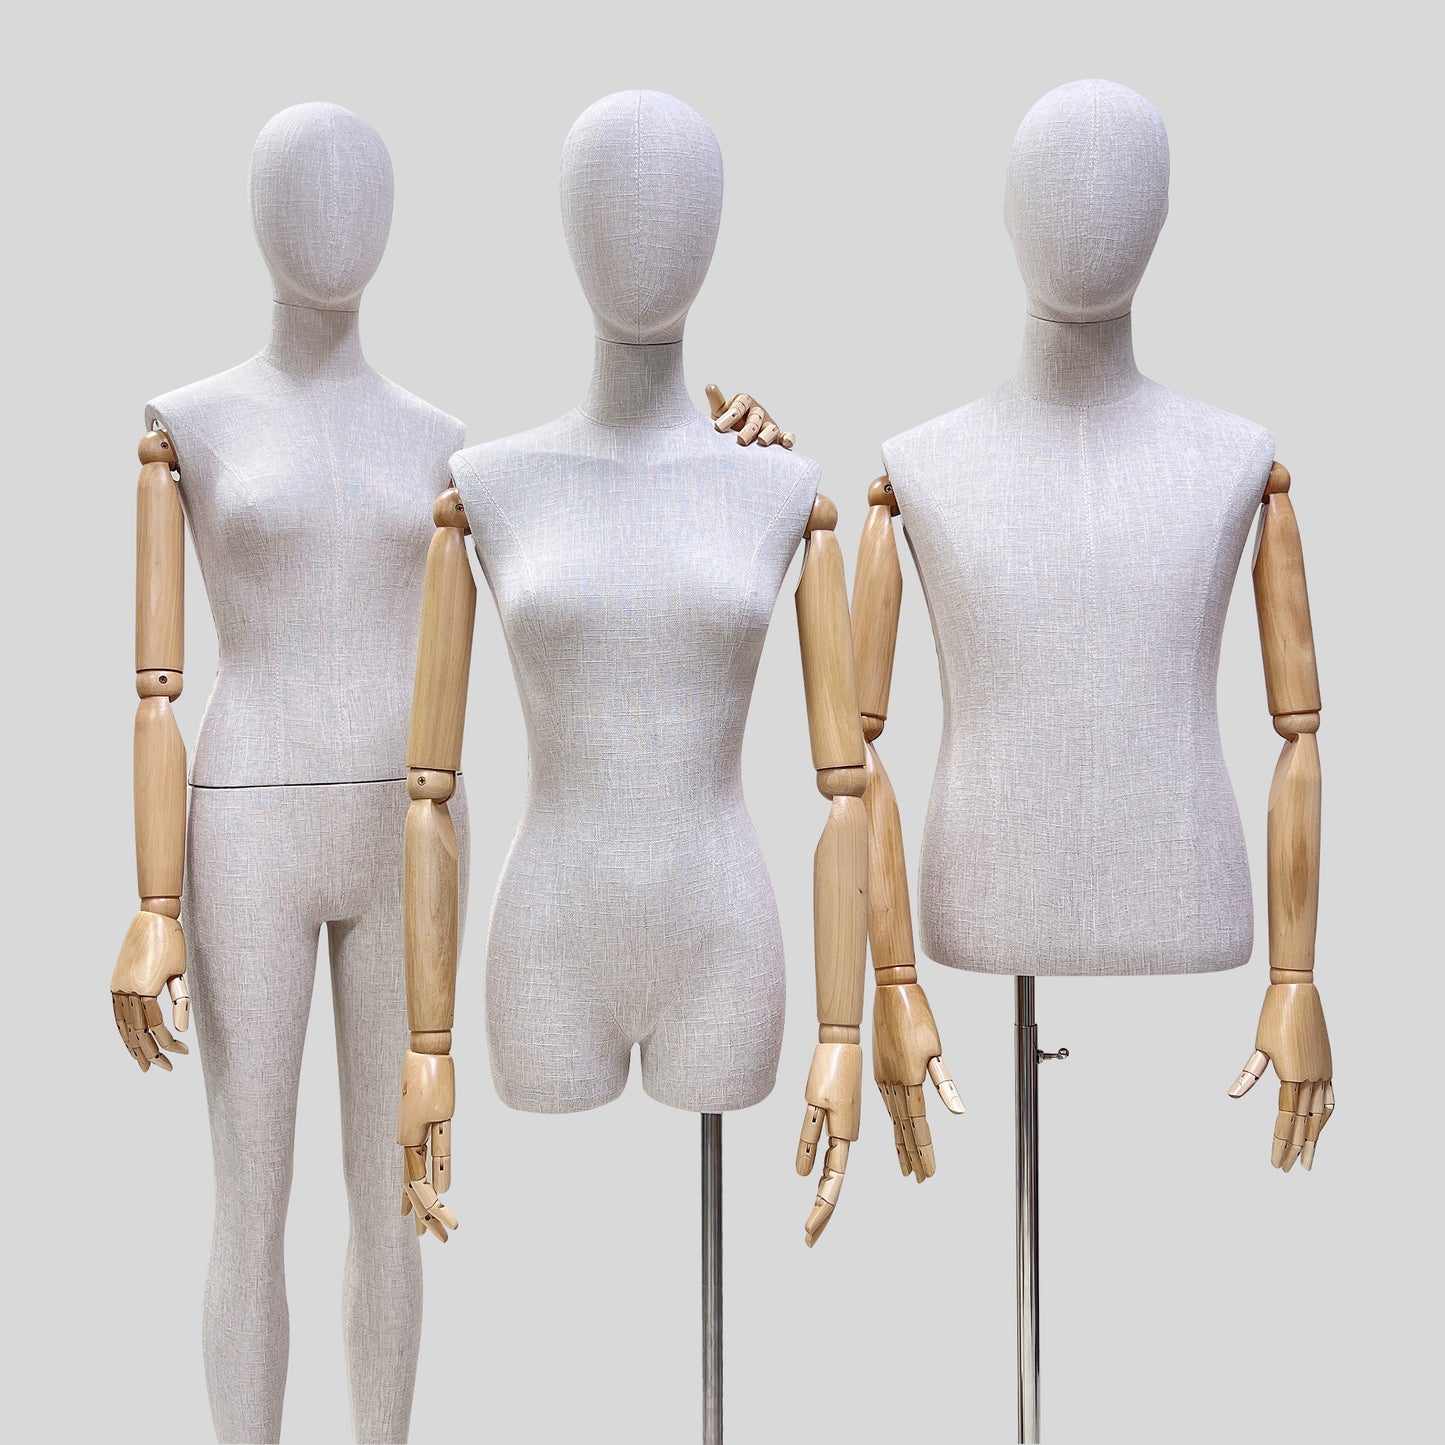 Jelimate High End Male Female Torso Mannequin With Wooden Arms,Bamboo Hemp Mannequin Full Body Half Body,Jewelry Wedding Dress Clothing Display Dress Form